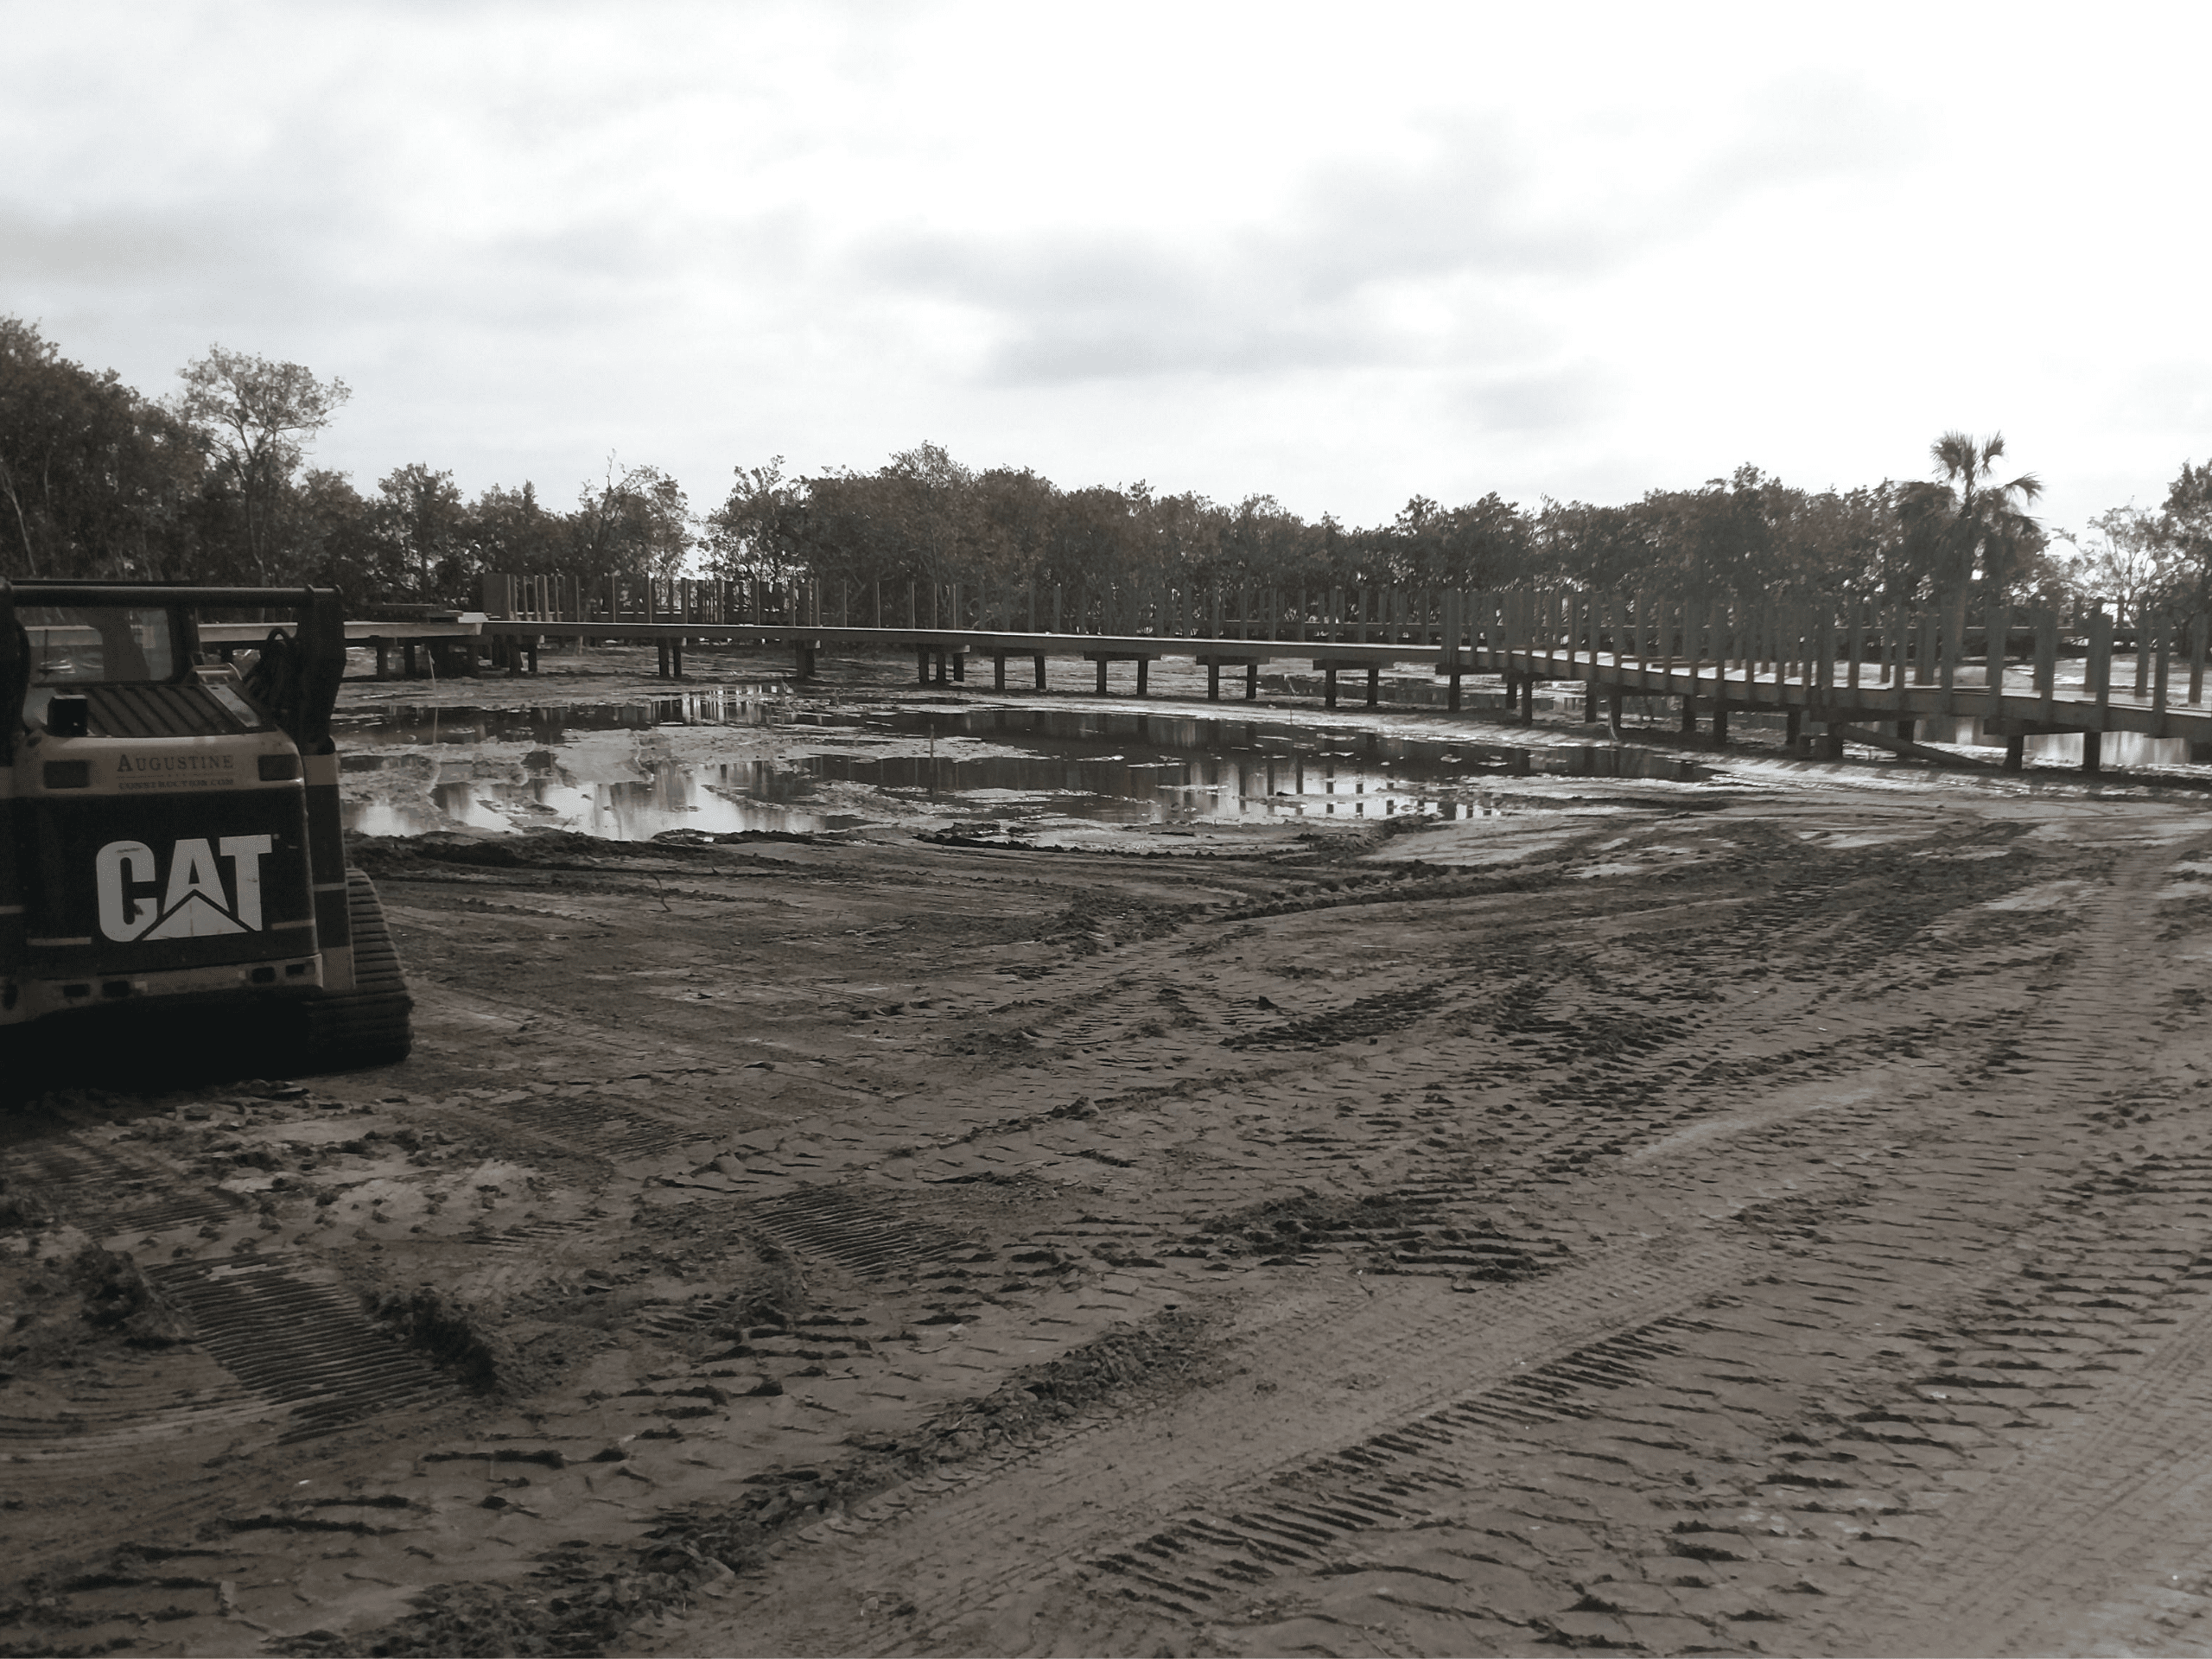 A "before" shot of a section of Safety Harbor prior to its restoration.